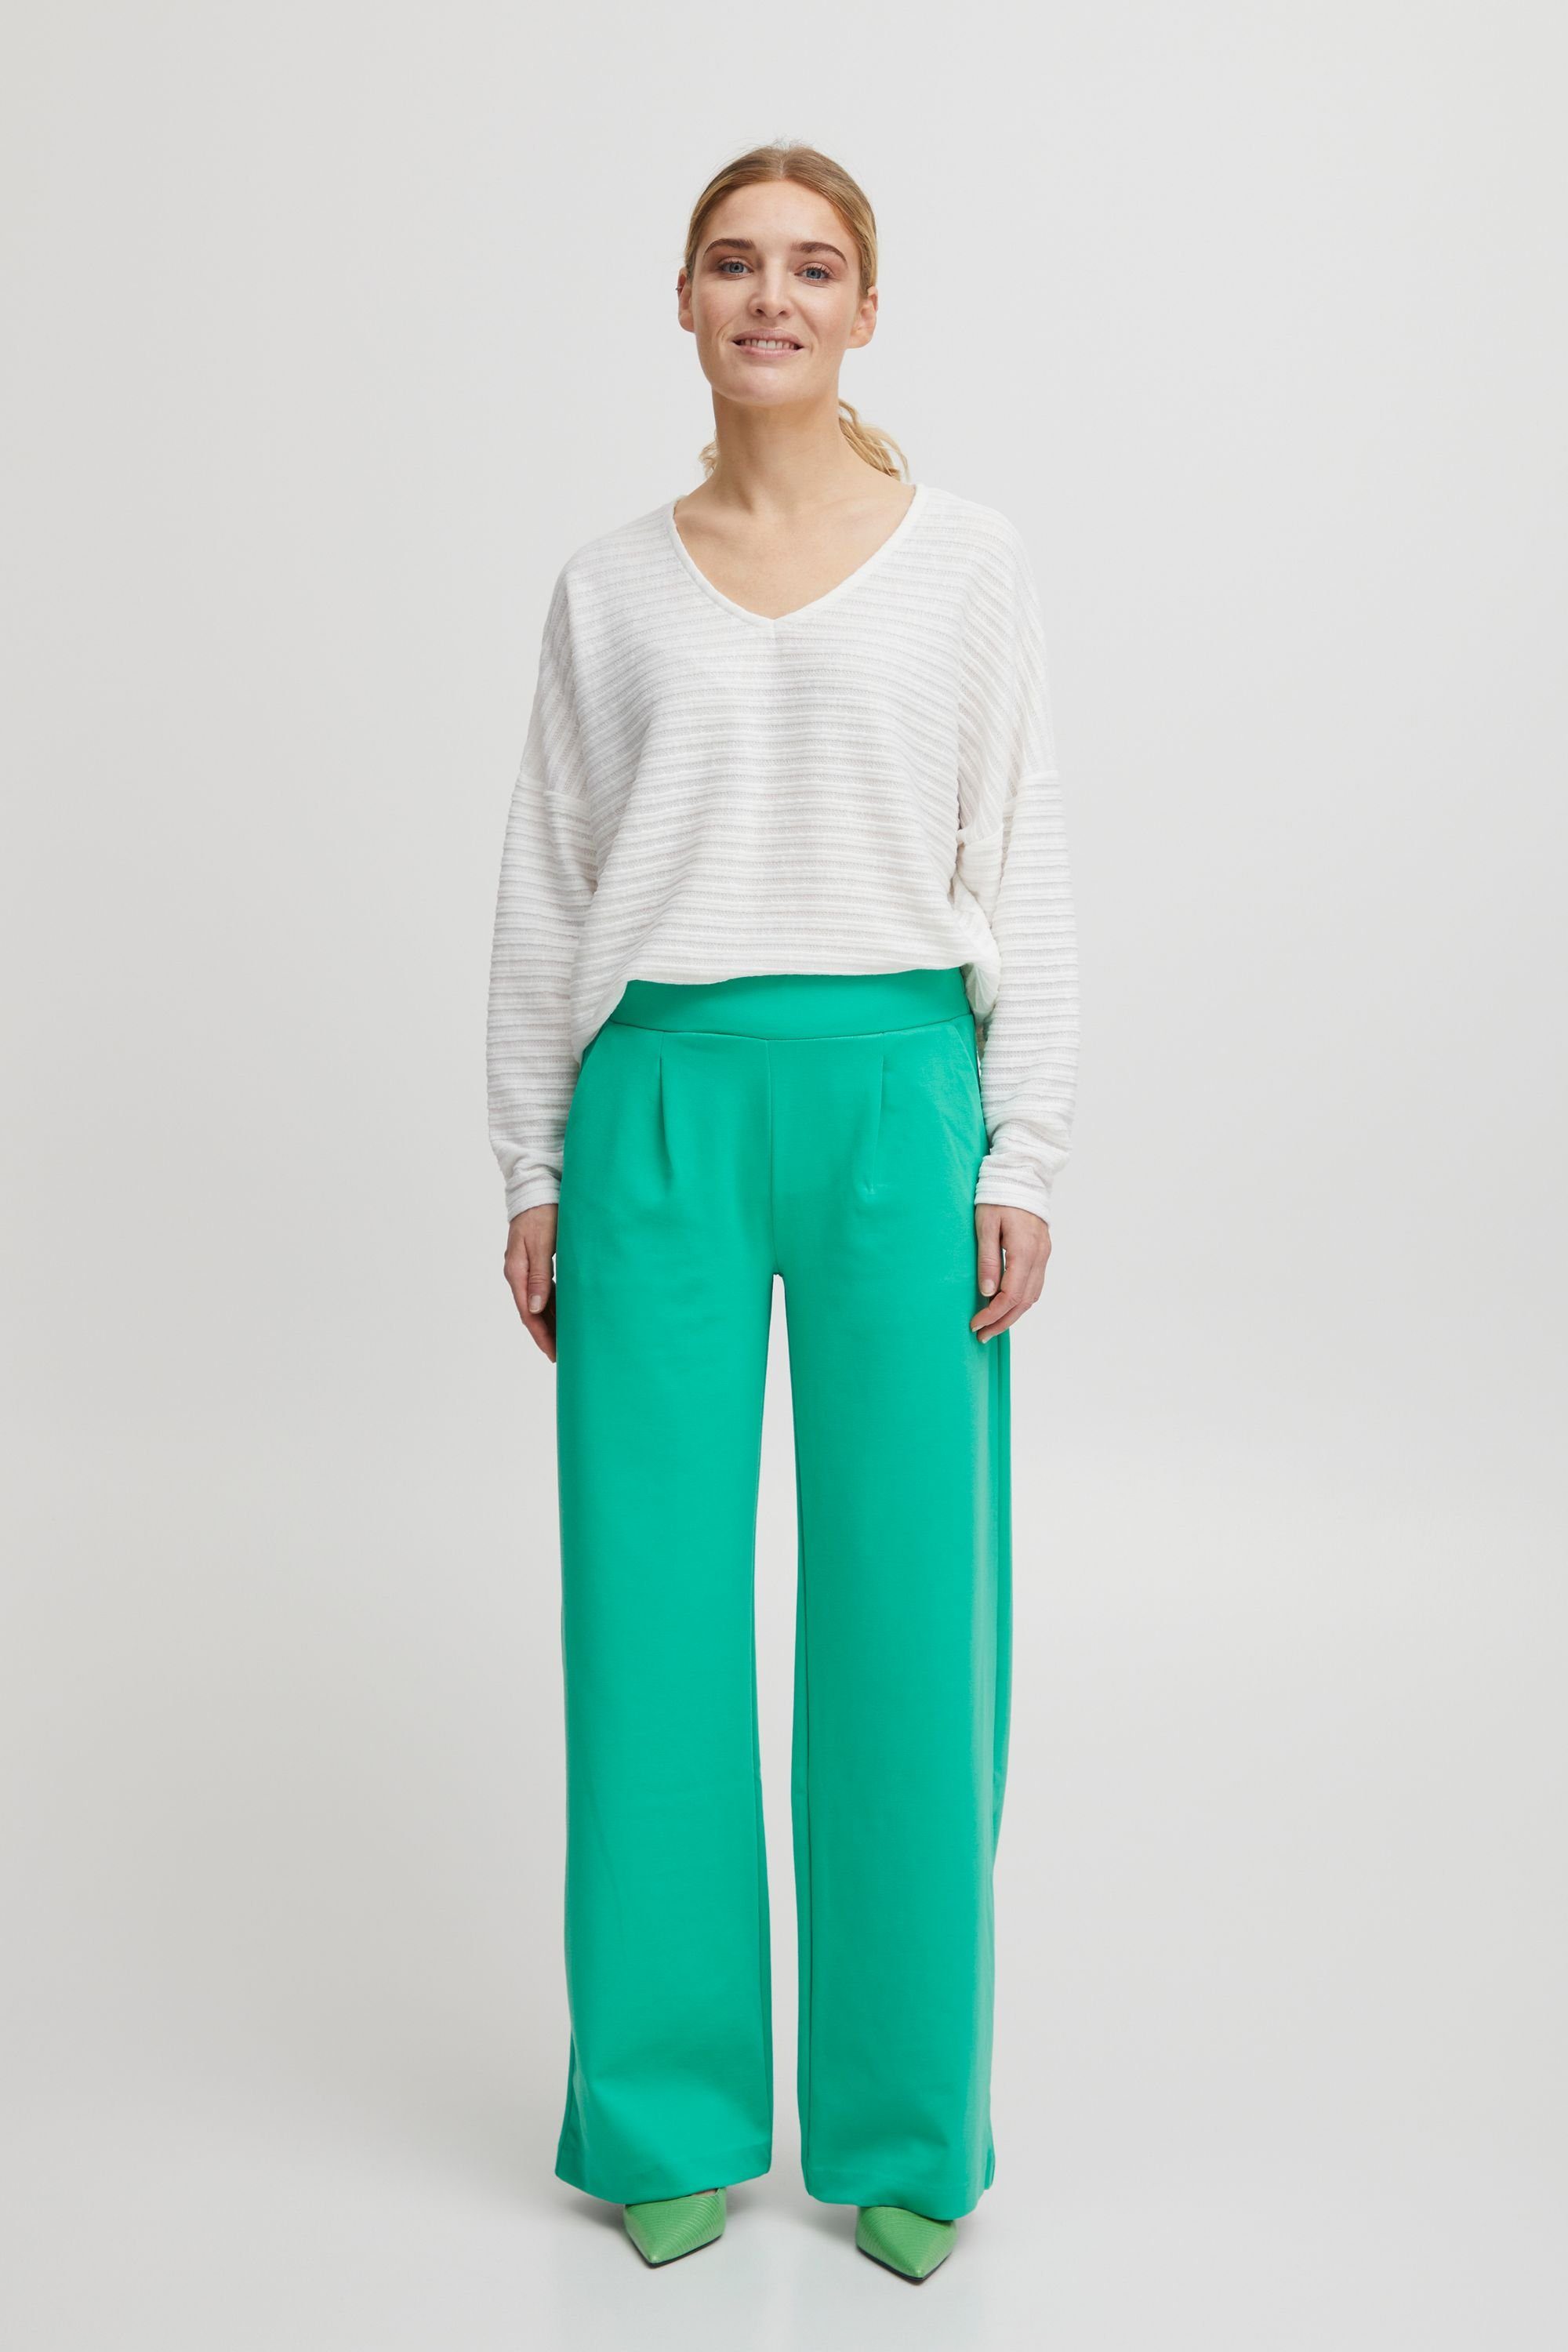 20812847 - (165930) Ming 2 Stoffhose WIDE PANTS BYRIZETTA b.young Green 2